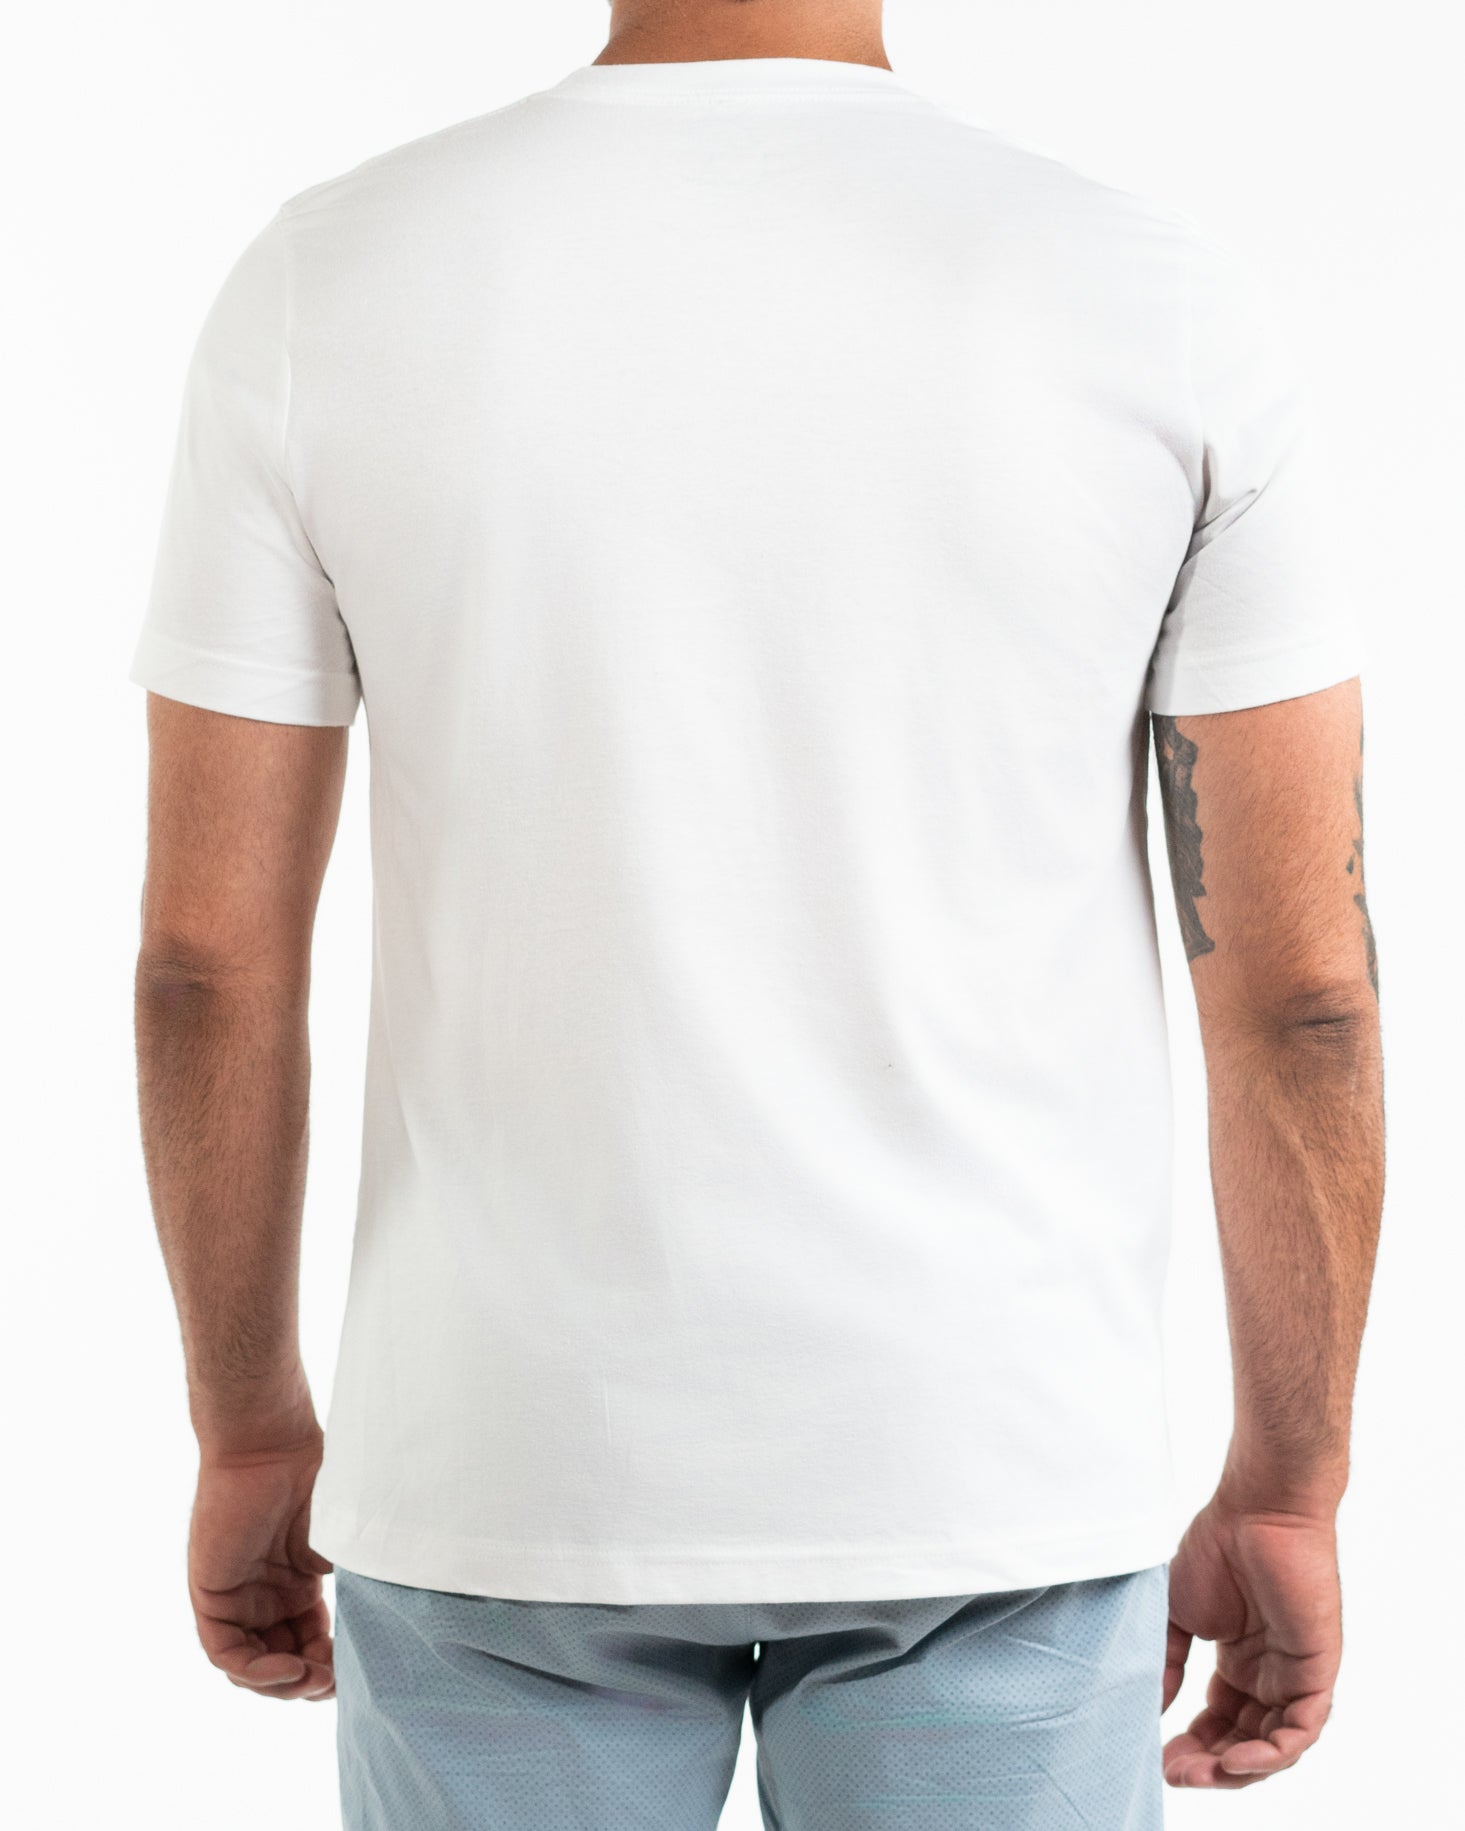 THE PERFECT WHITE T-SHIRT  WHICH BRAND MAKES THE BEST WHITE T